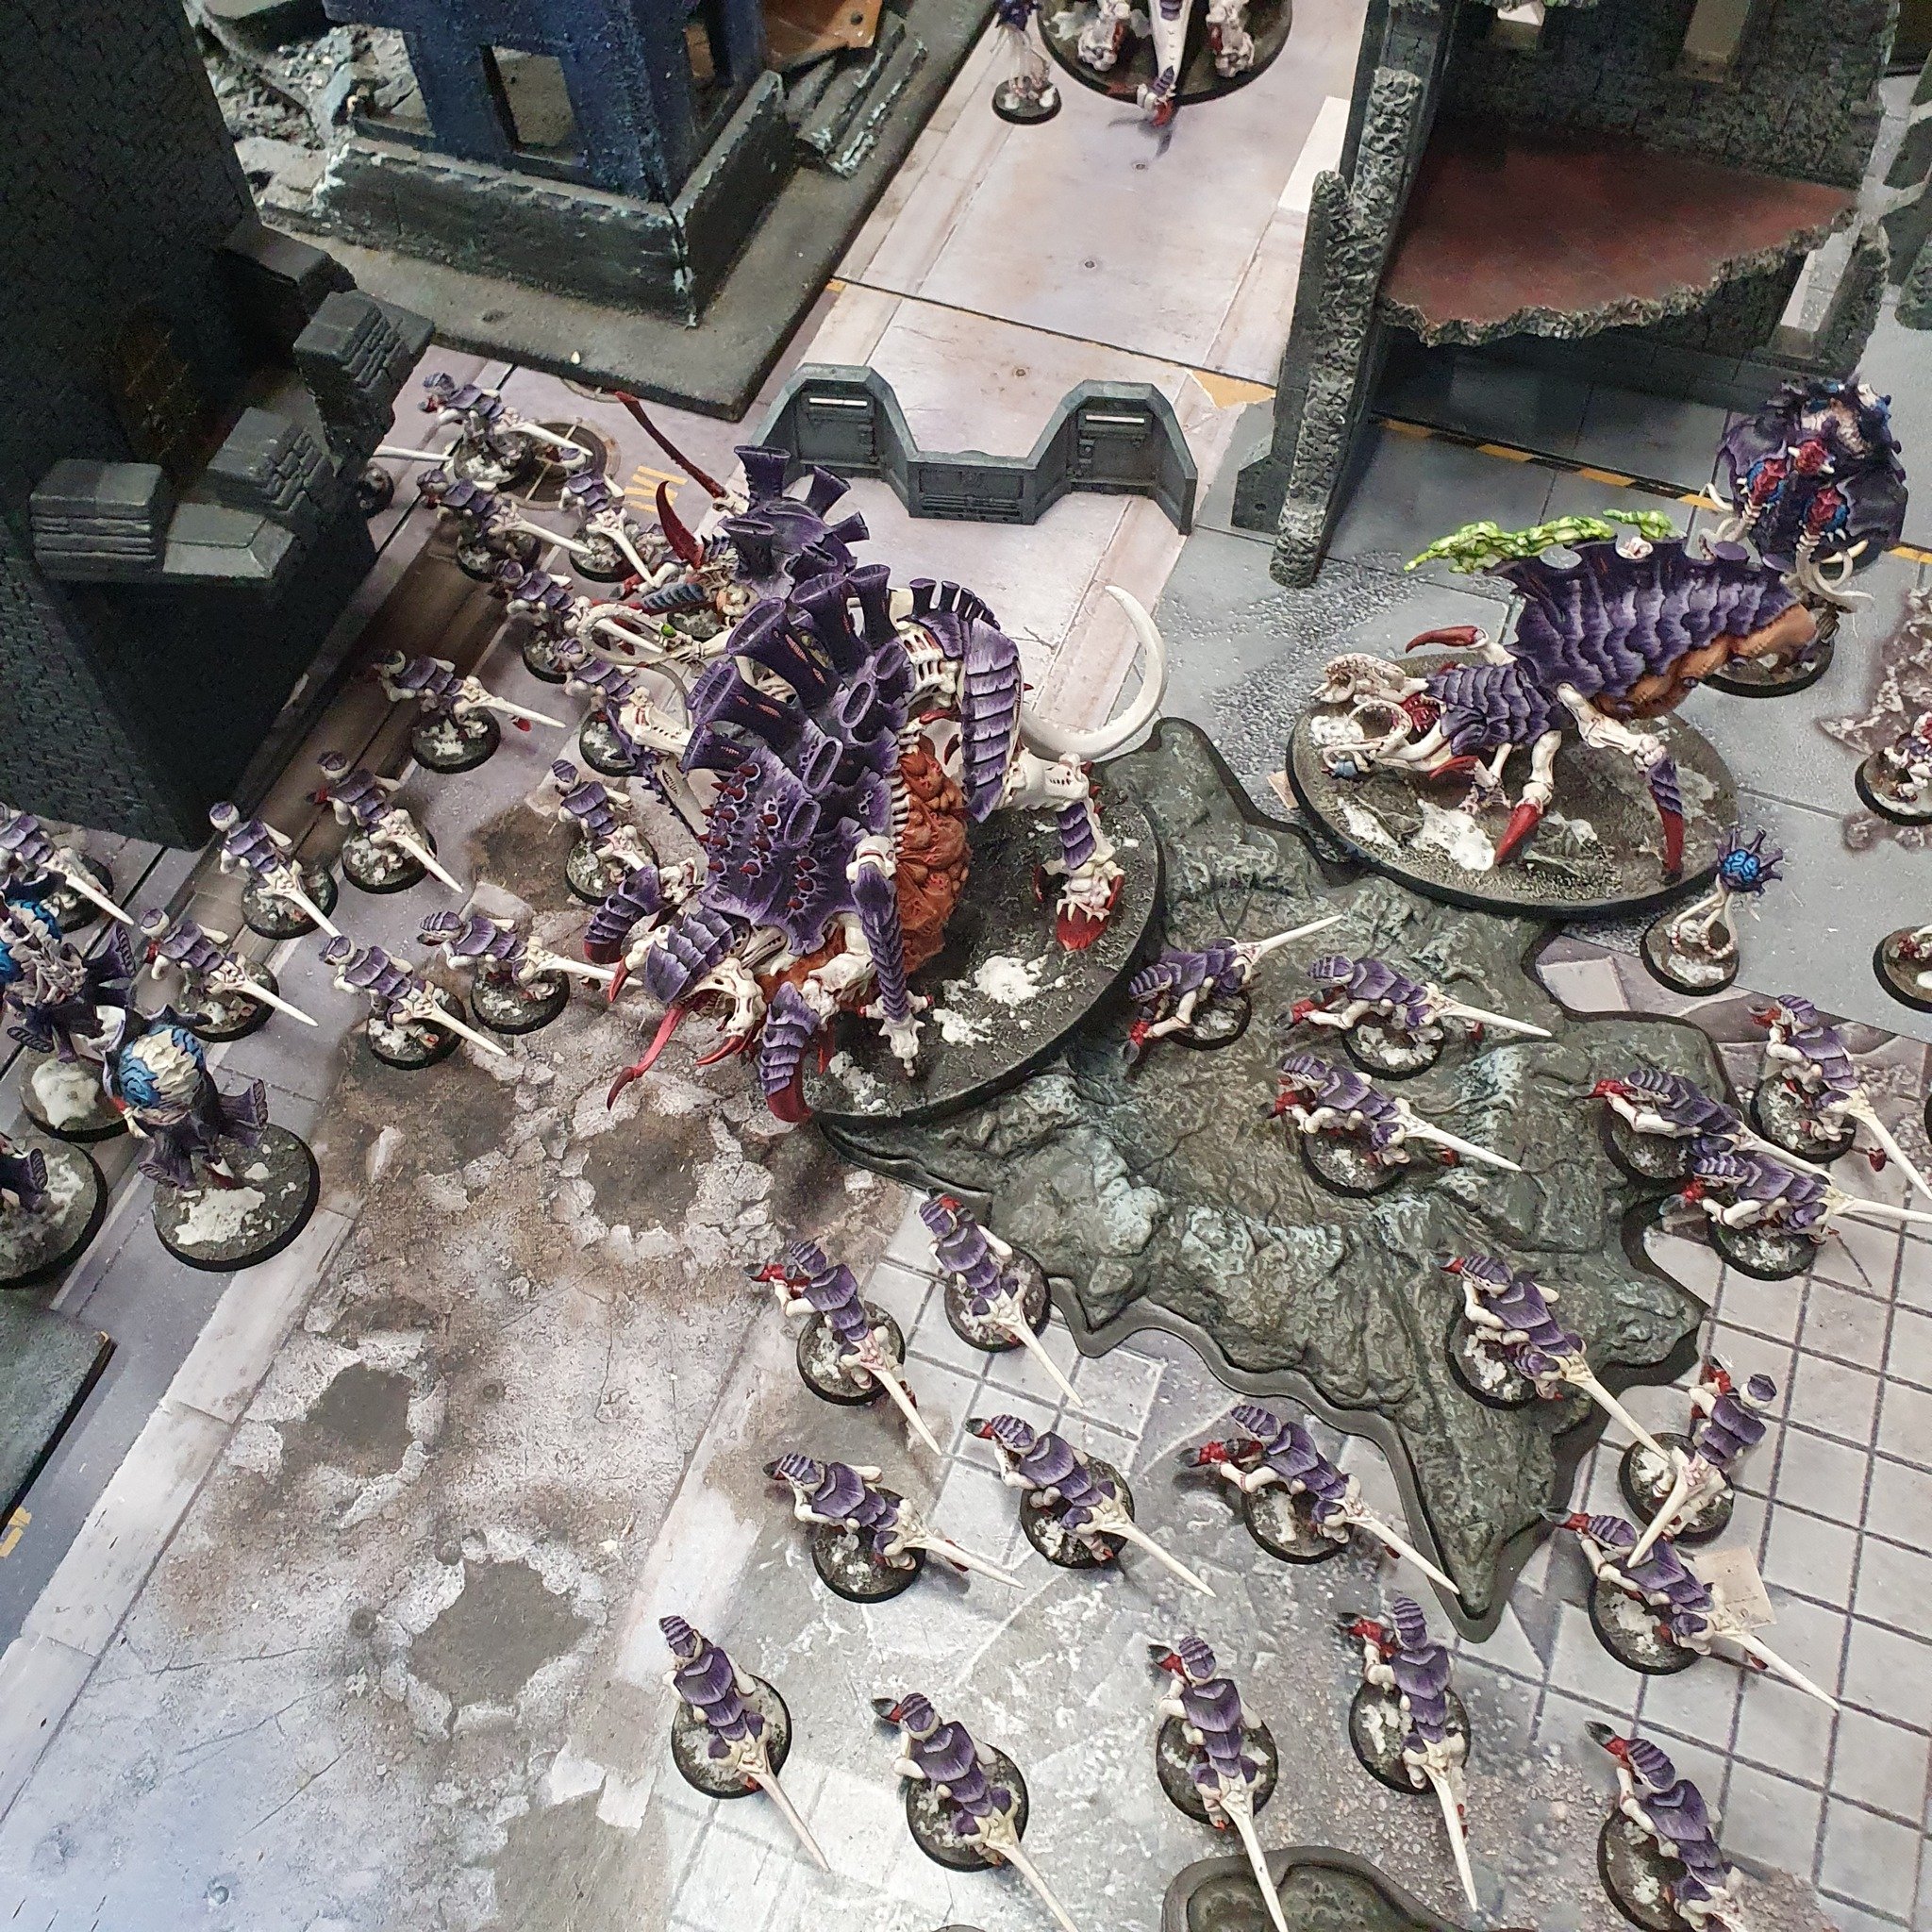  Tyranids swarm a ruined city in the far future 